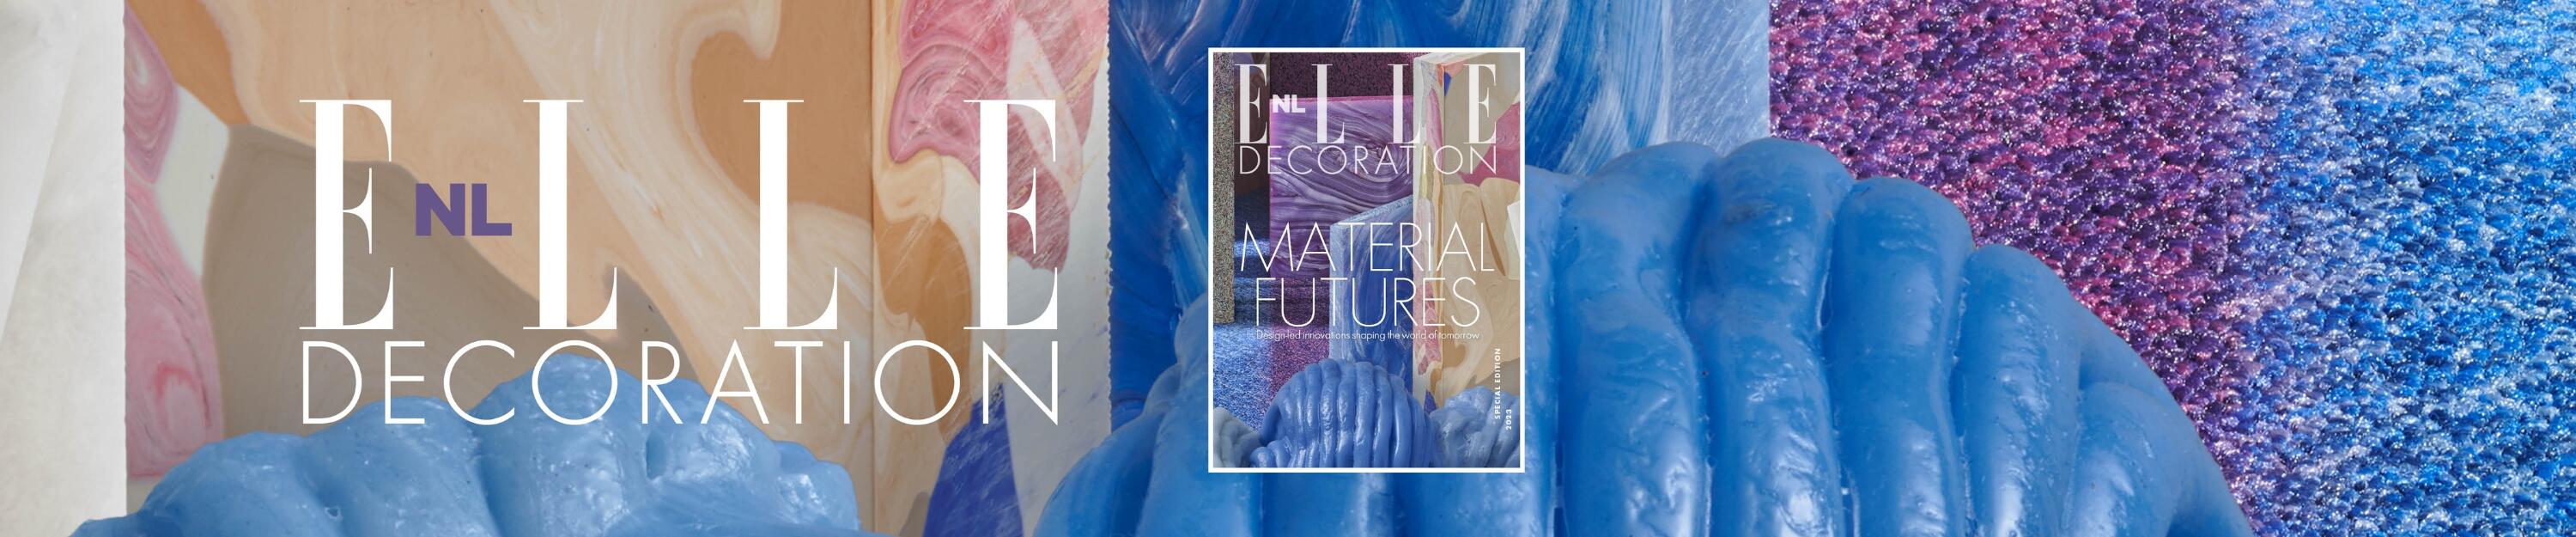 Cover reveal Material Futures special edition magazine curated in collaboration with ELLE Decoration